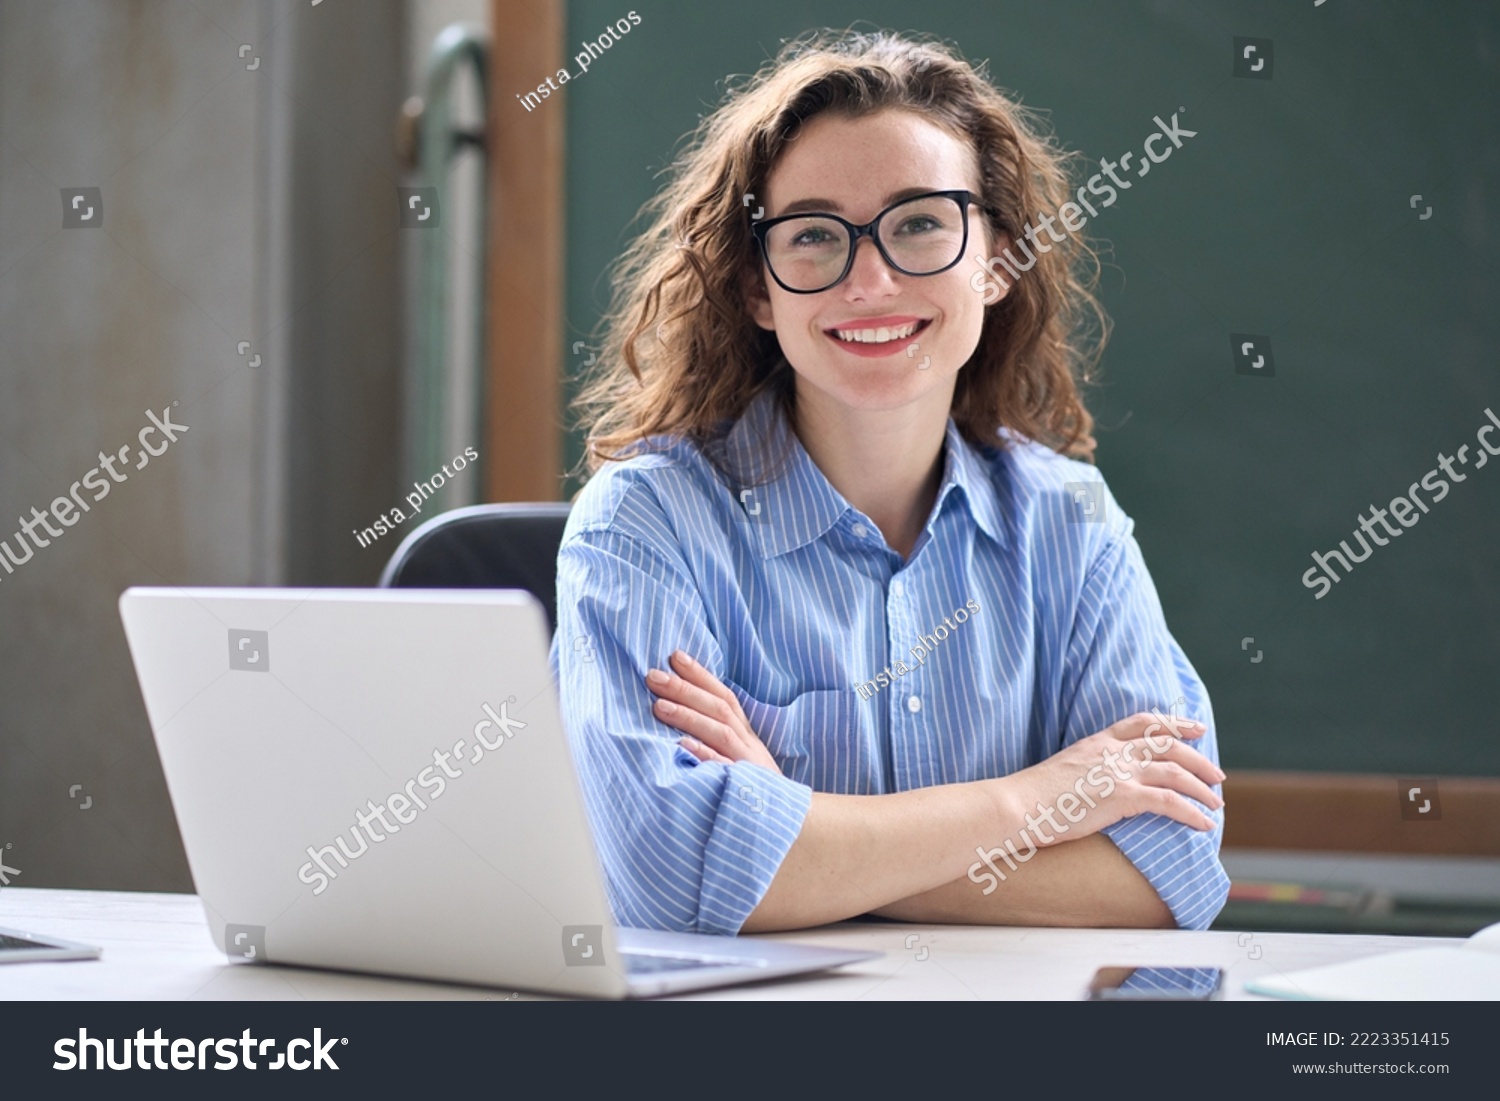 Young happy business woman sitting at work desk with laptop. Smiling school professional online teacher coach advertising virtual distance students classes teaching remote education webinars. Portrait #2223351415